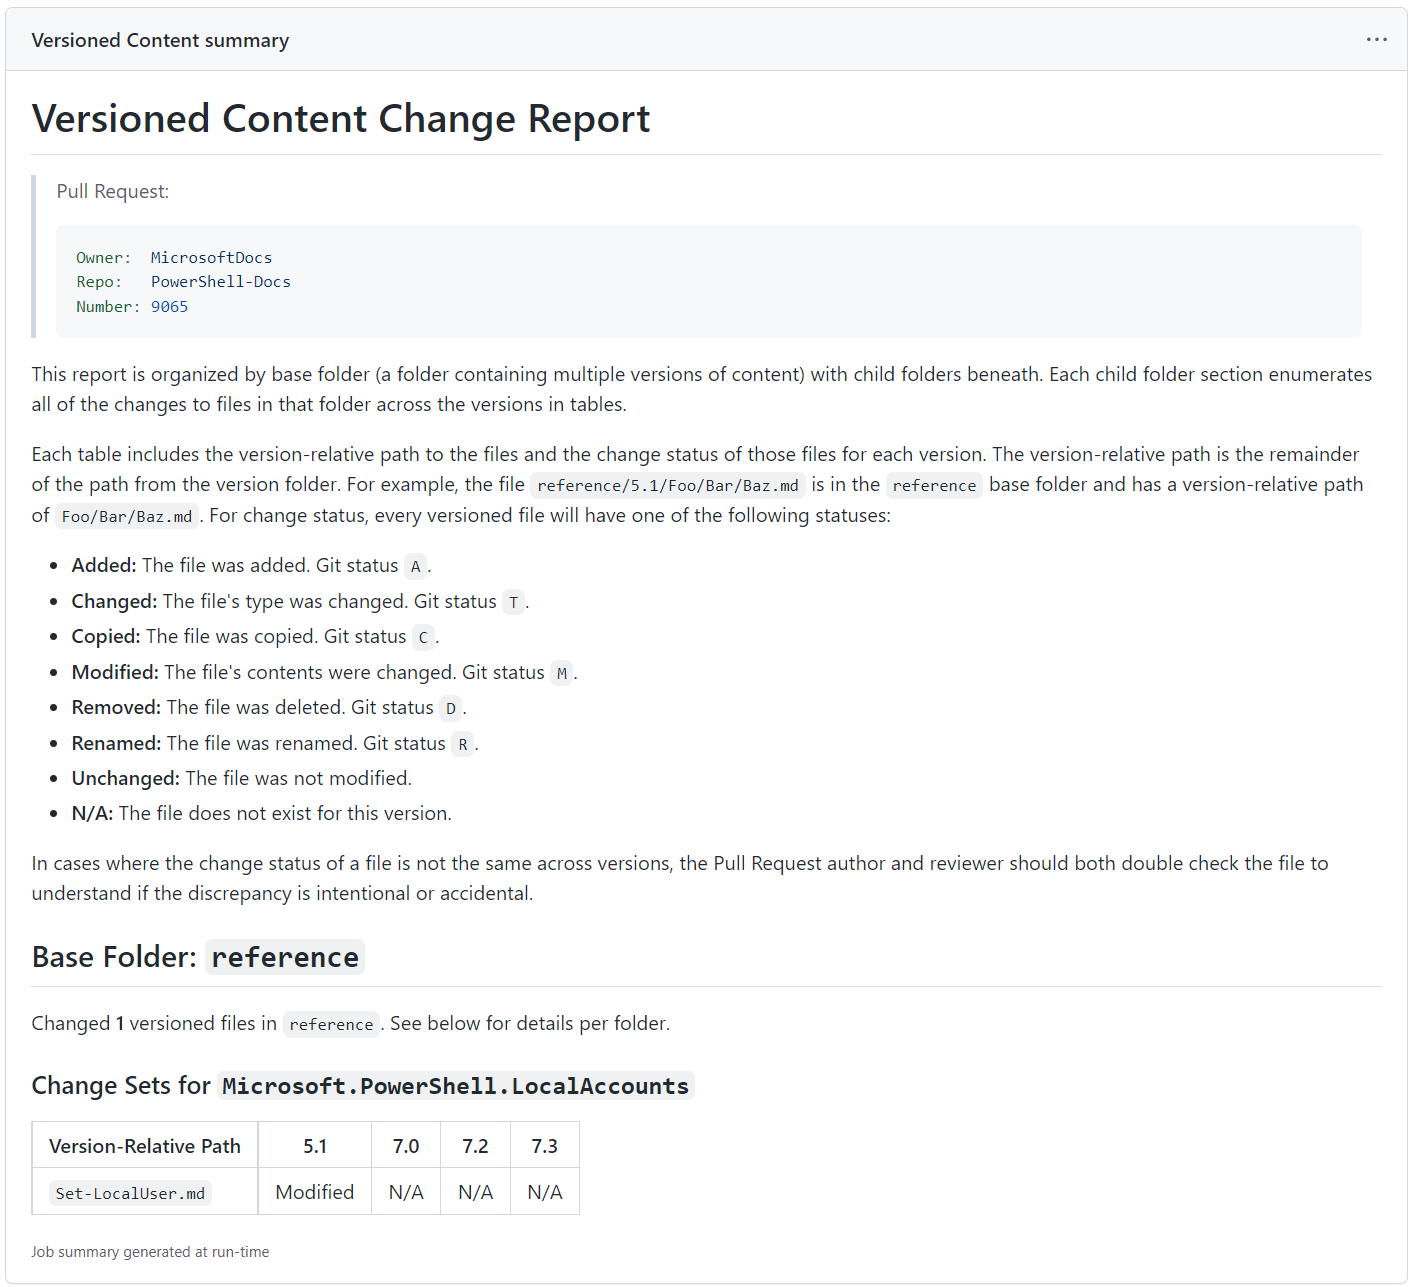 Example of a versioned content change report